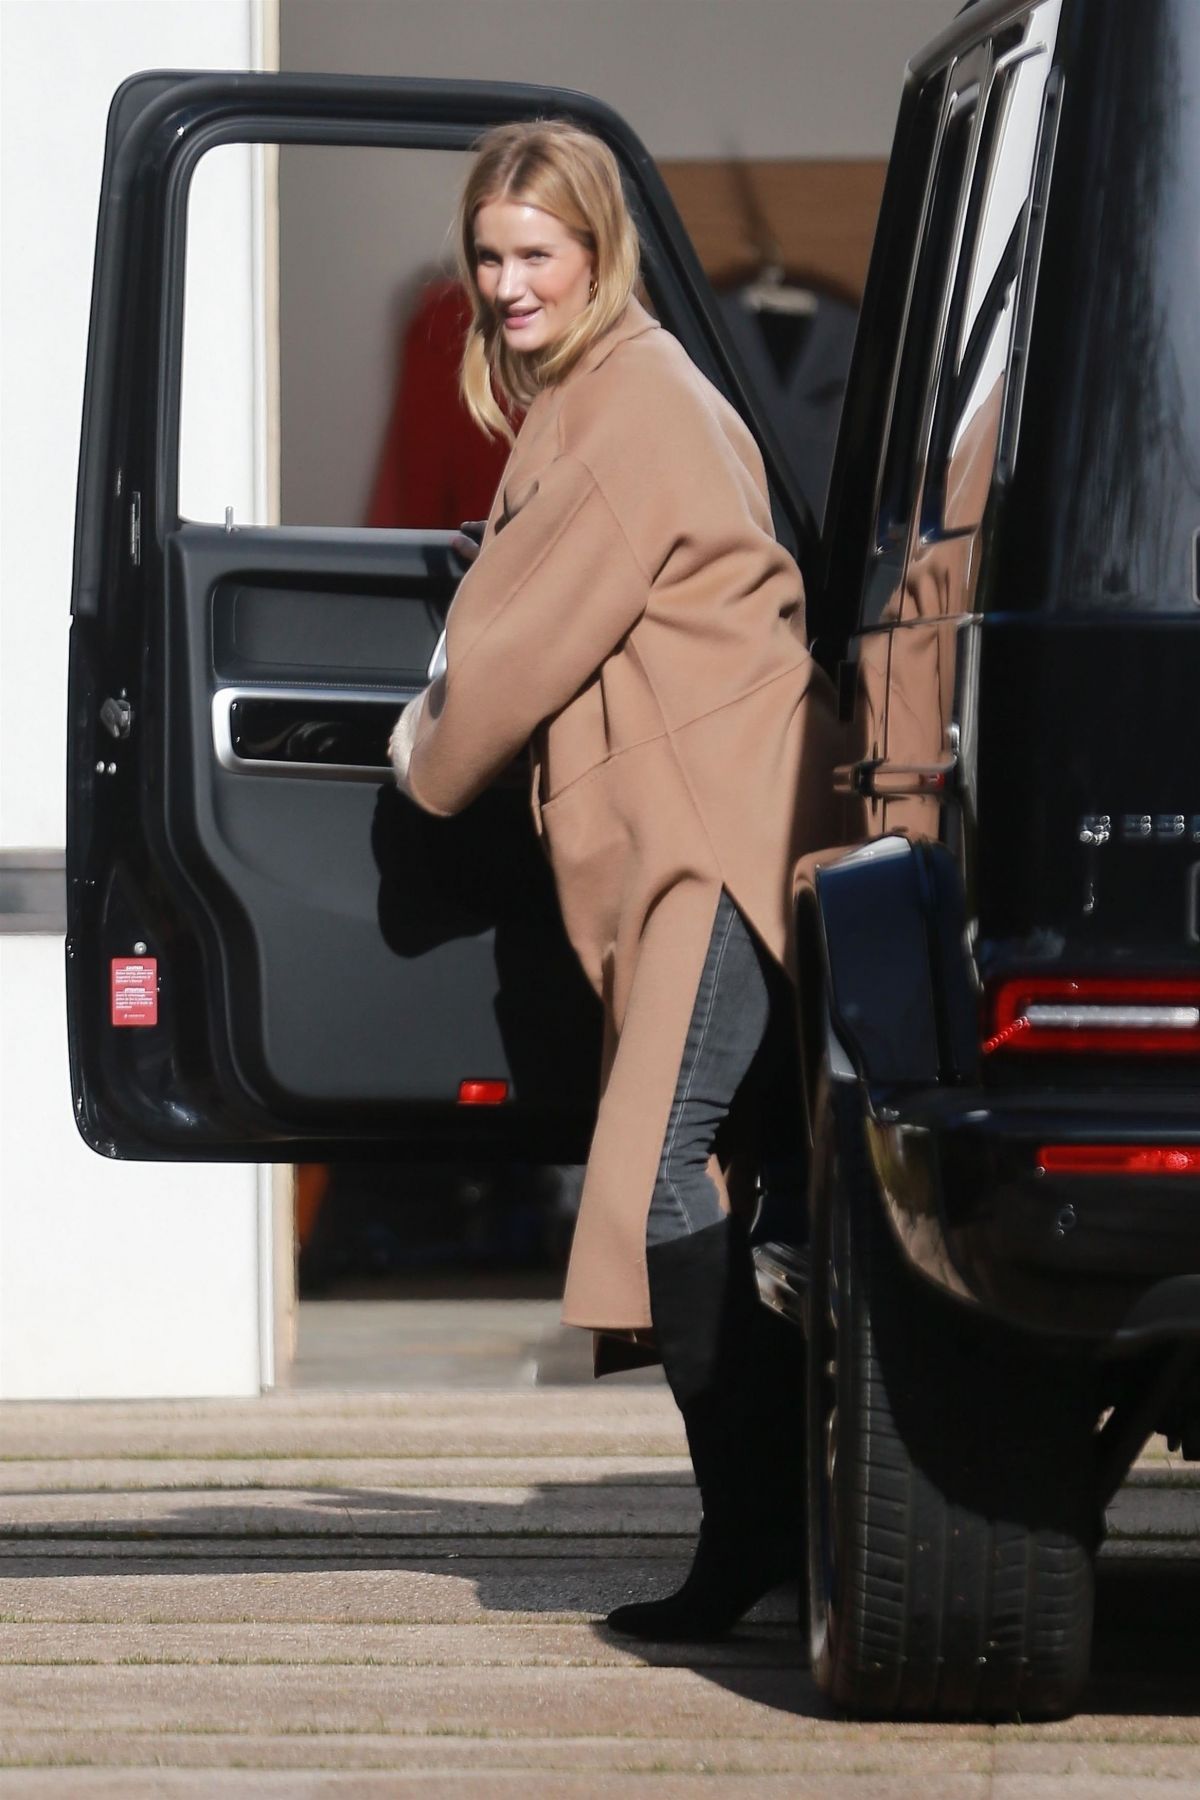 rosie-huntington-whiteley-out-in-beverly-hills-02-21-2019-4.jpg